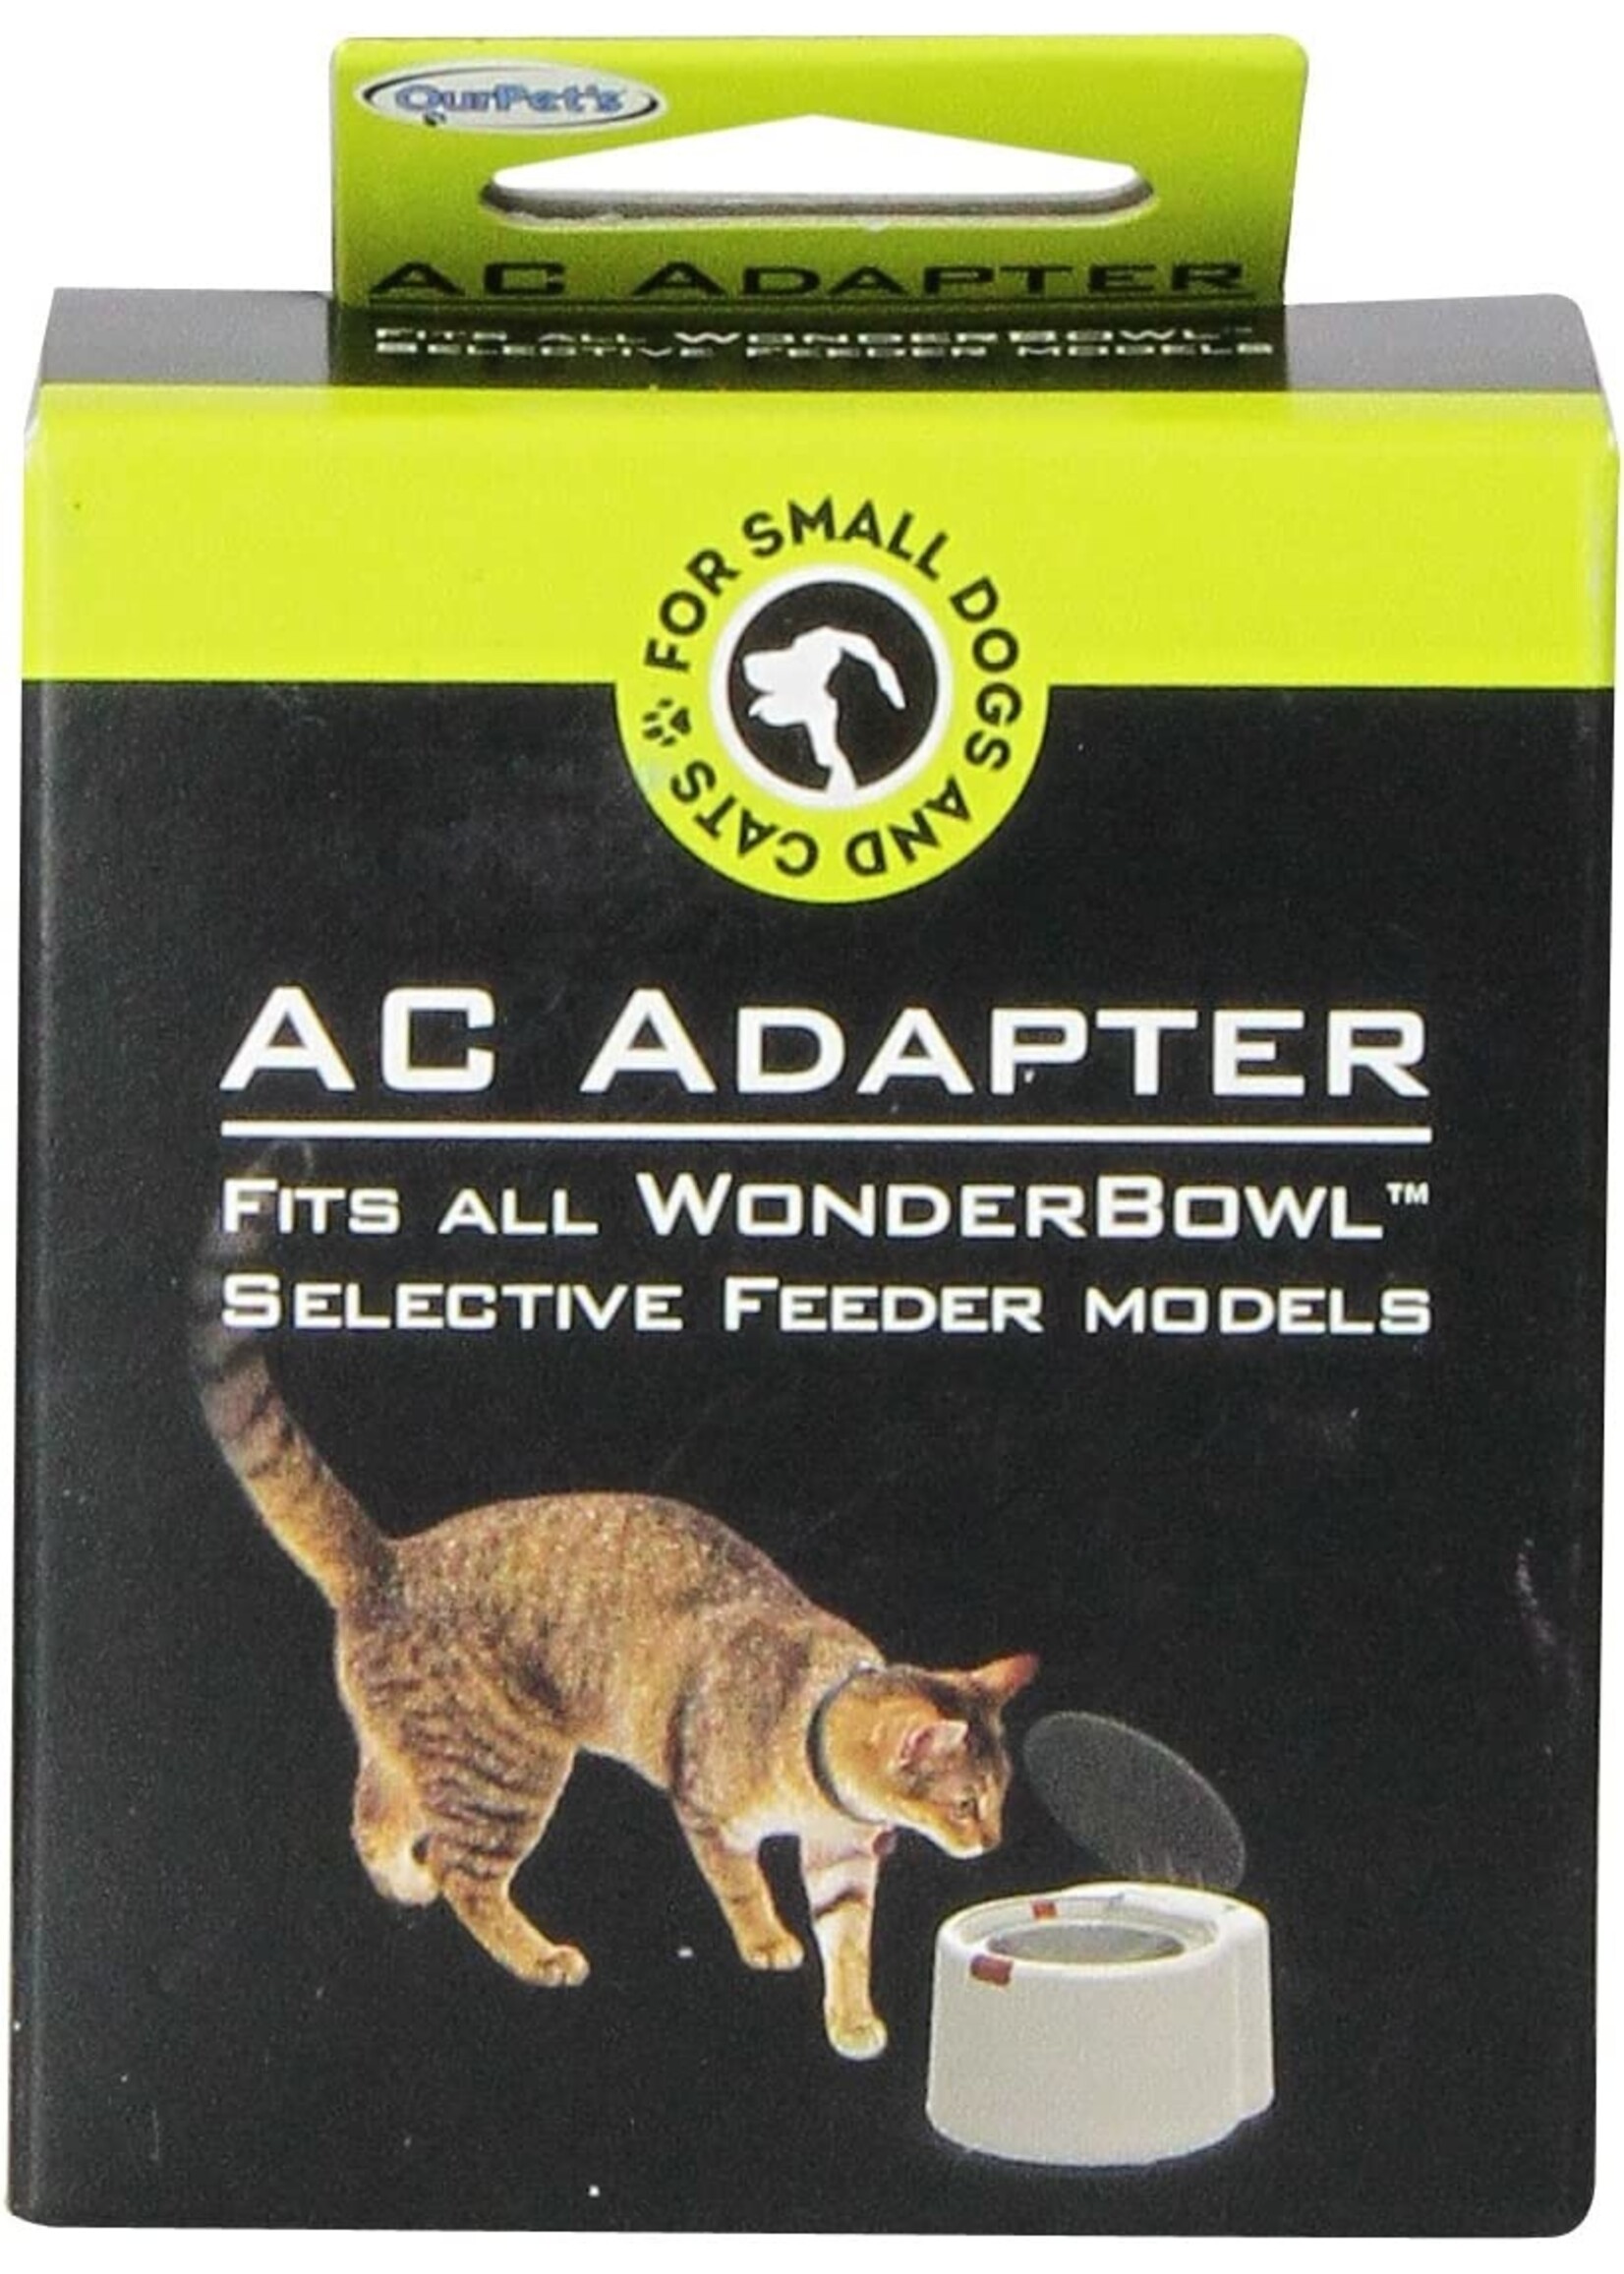 Our Pets AC Adapter fits all wonderbowl